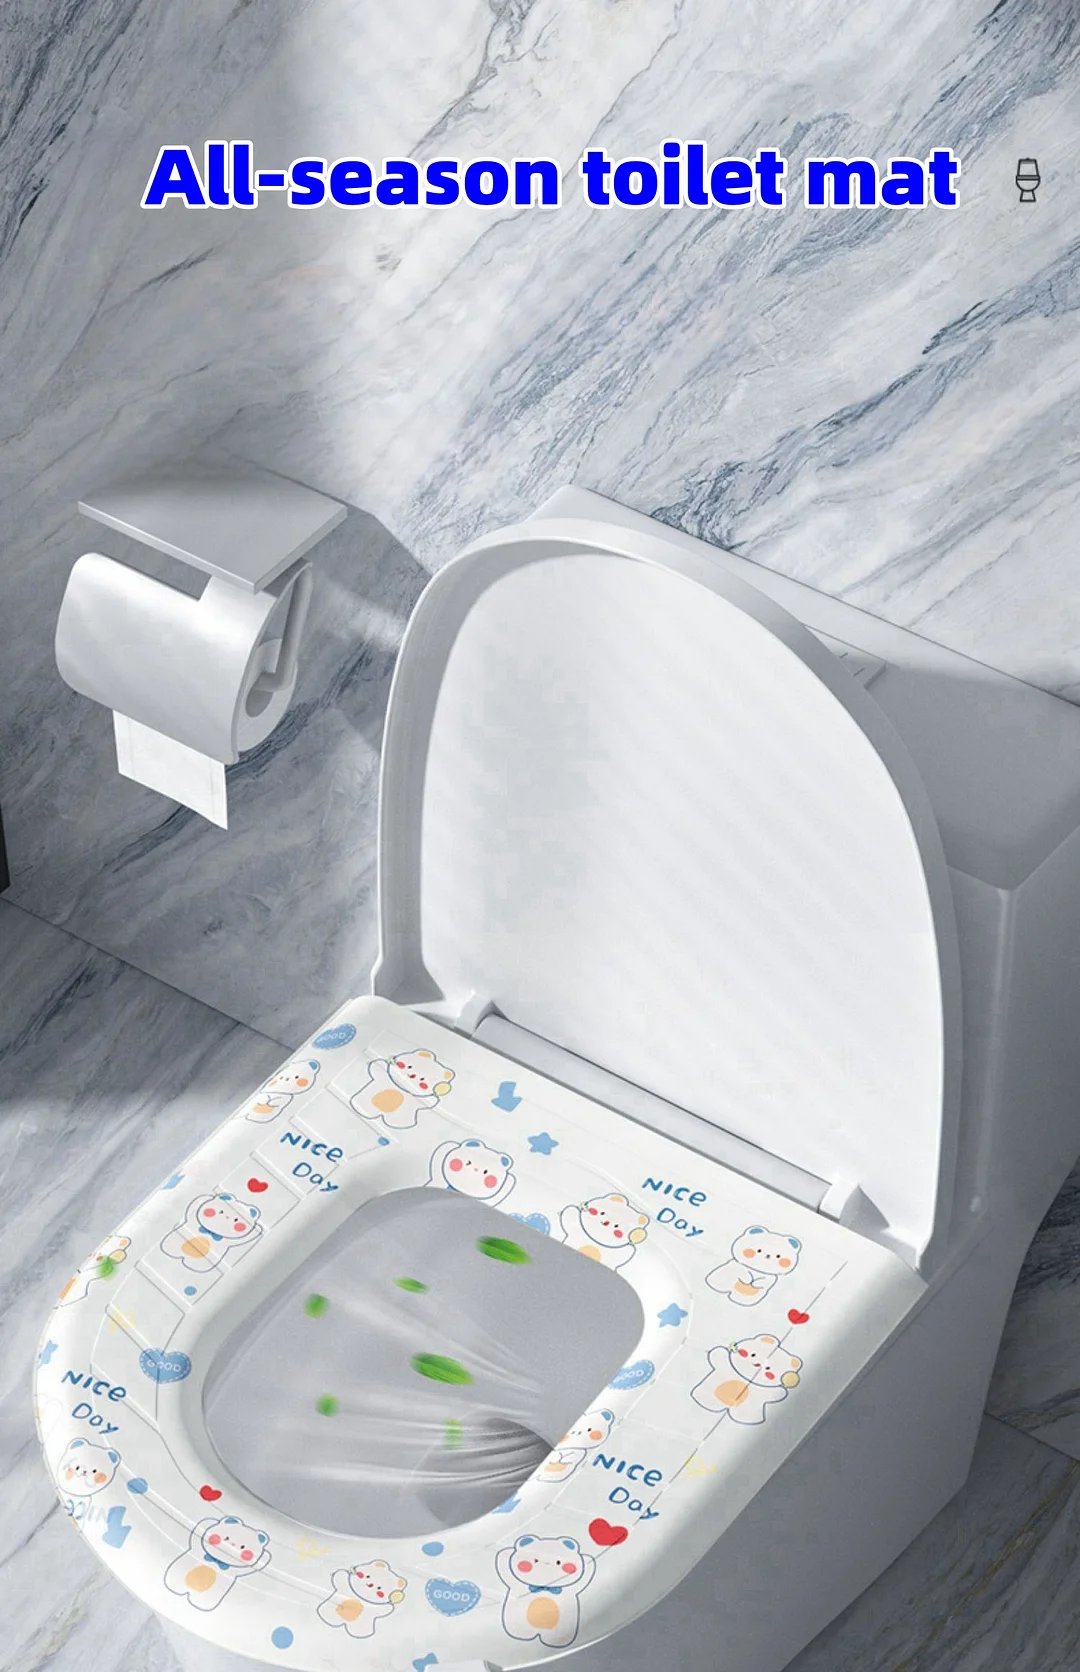 All-season waterproof and easy-to-clean toilet seat